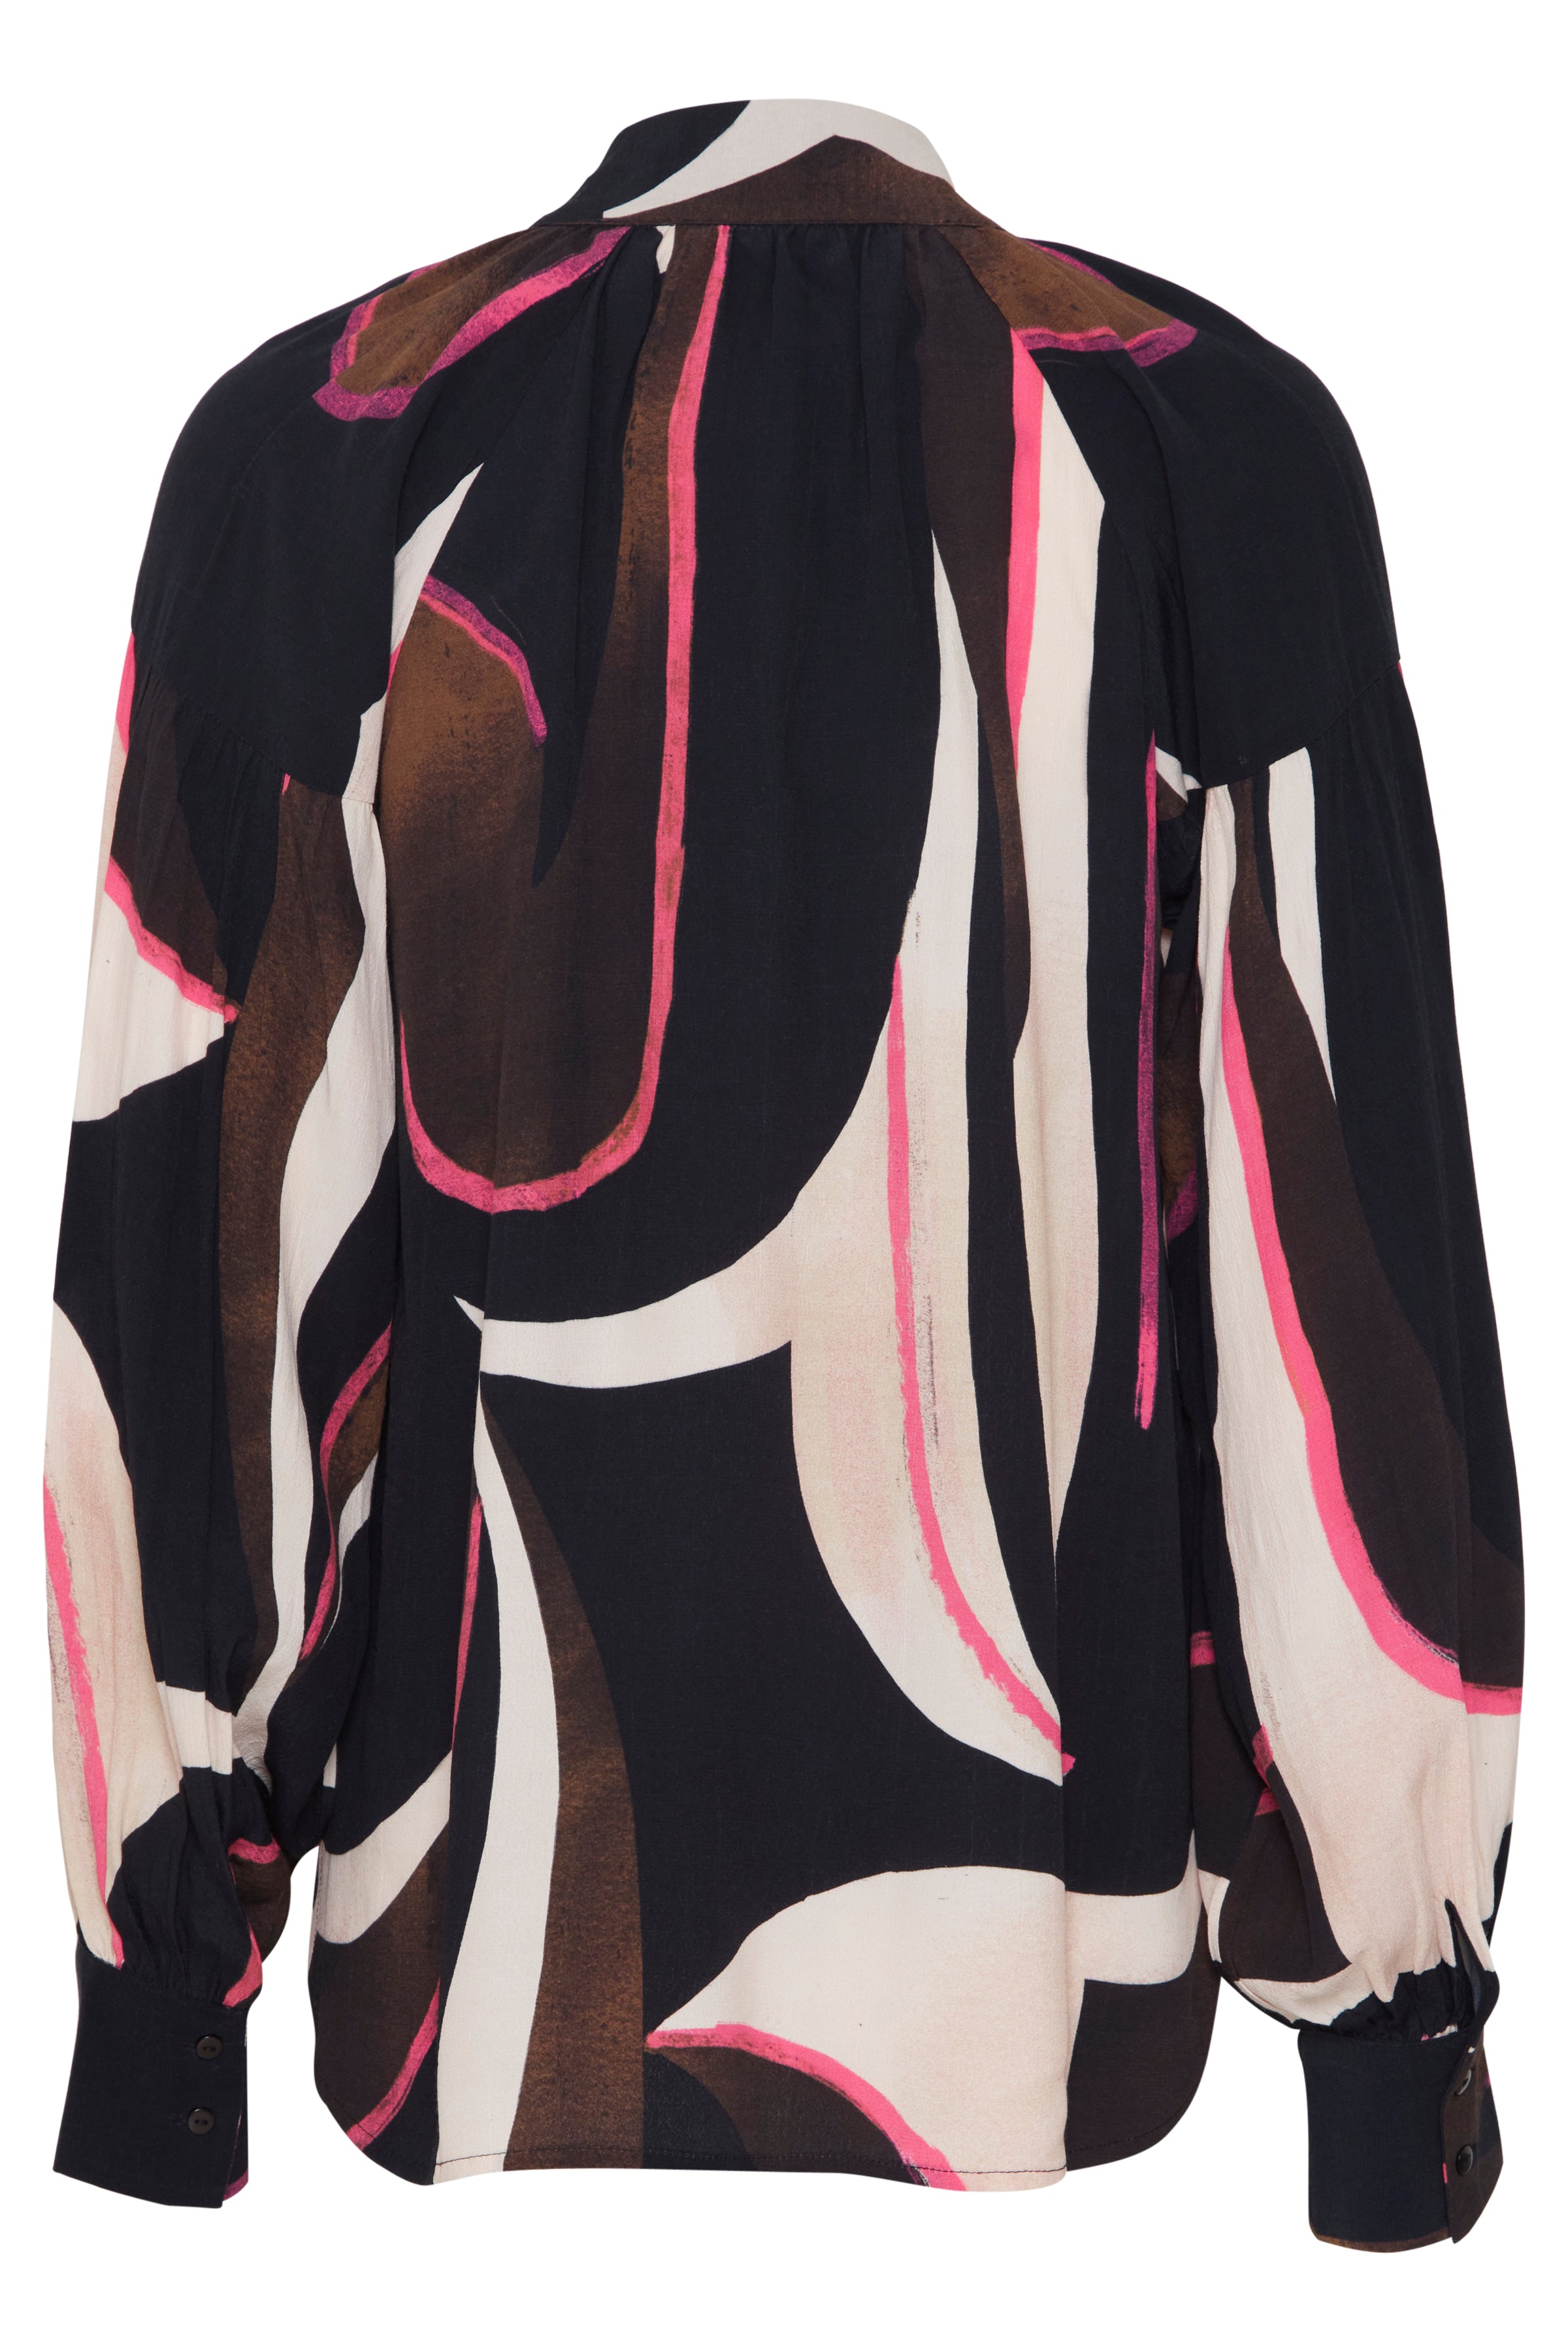 20613285 Blazer/Pink Printed Frlena Navy – Abstract 67 Blouse, Boutique Fransa Ruby